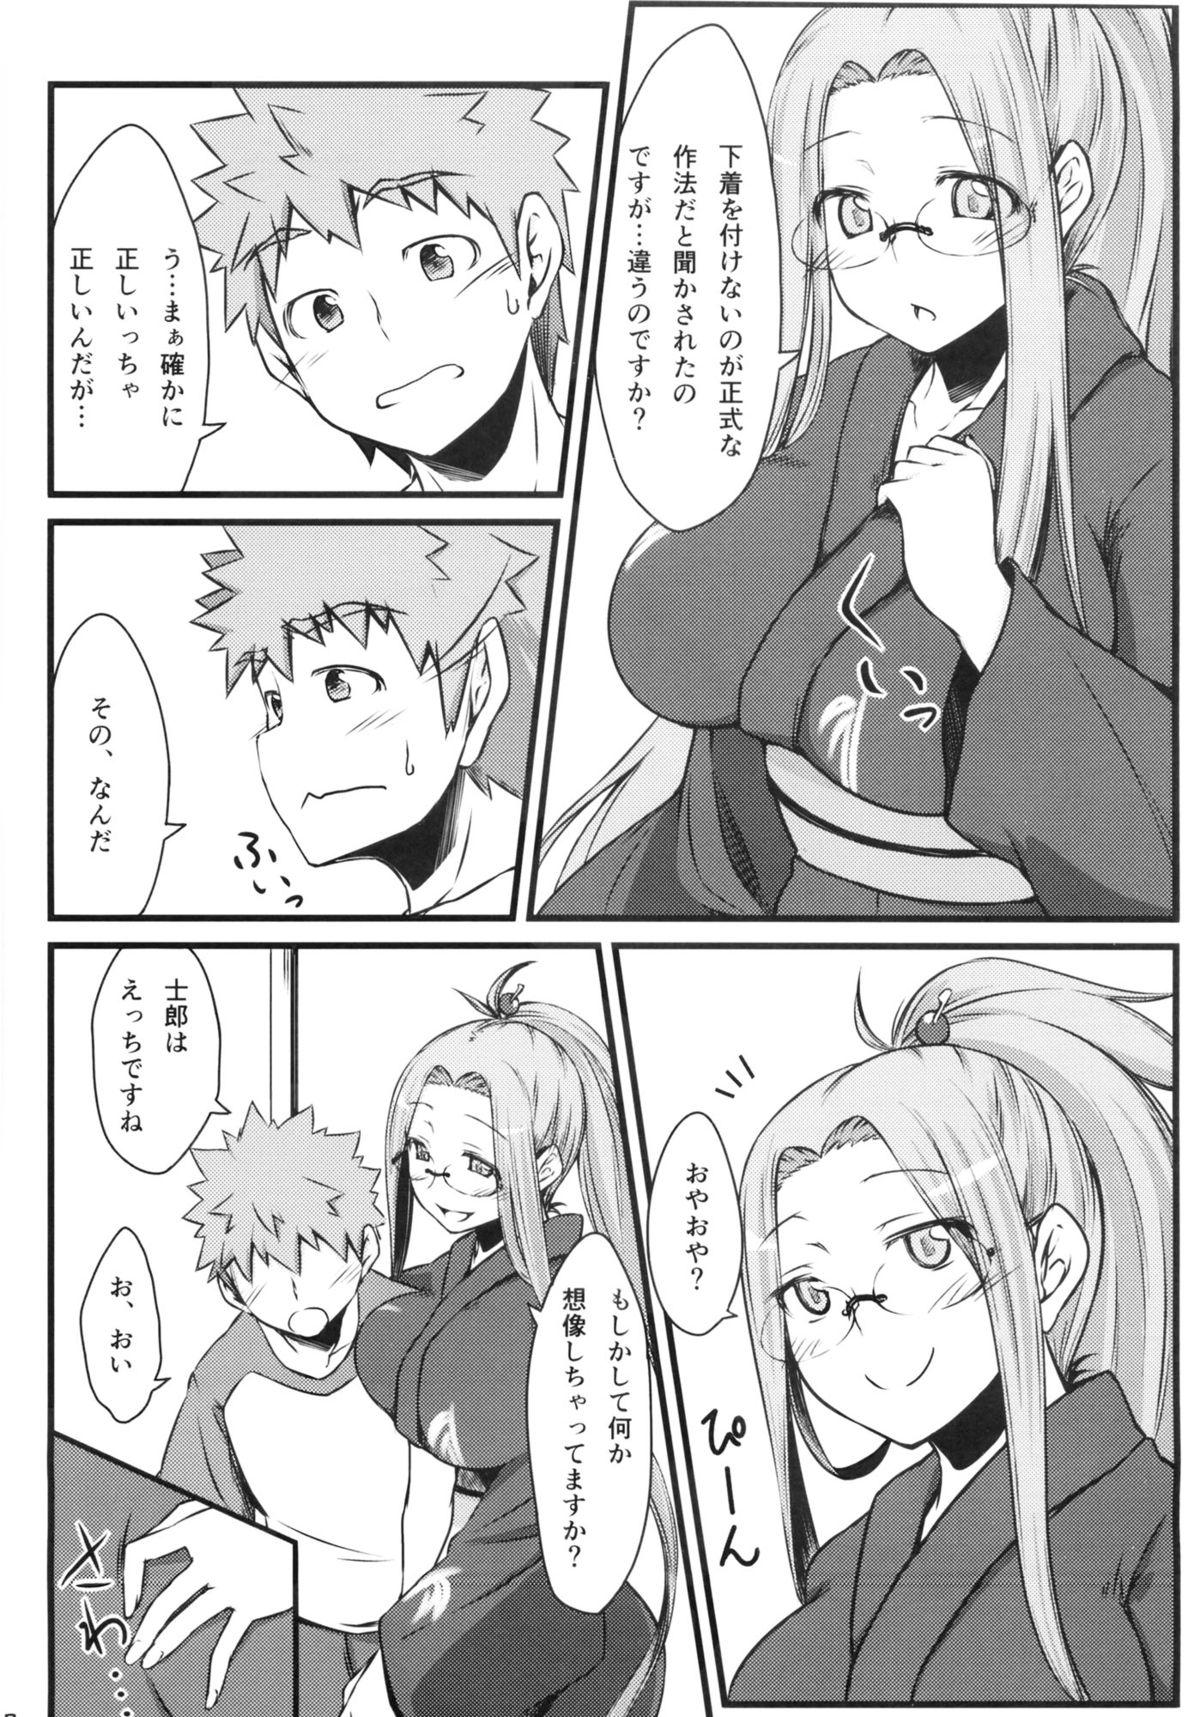 Missionary R8 - Fate hollow ataraxia Leather - Page 6